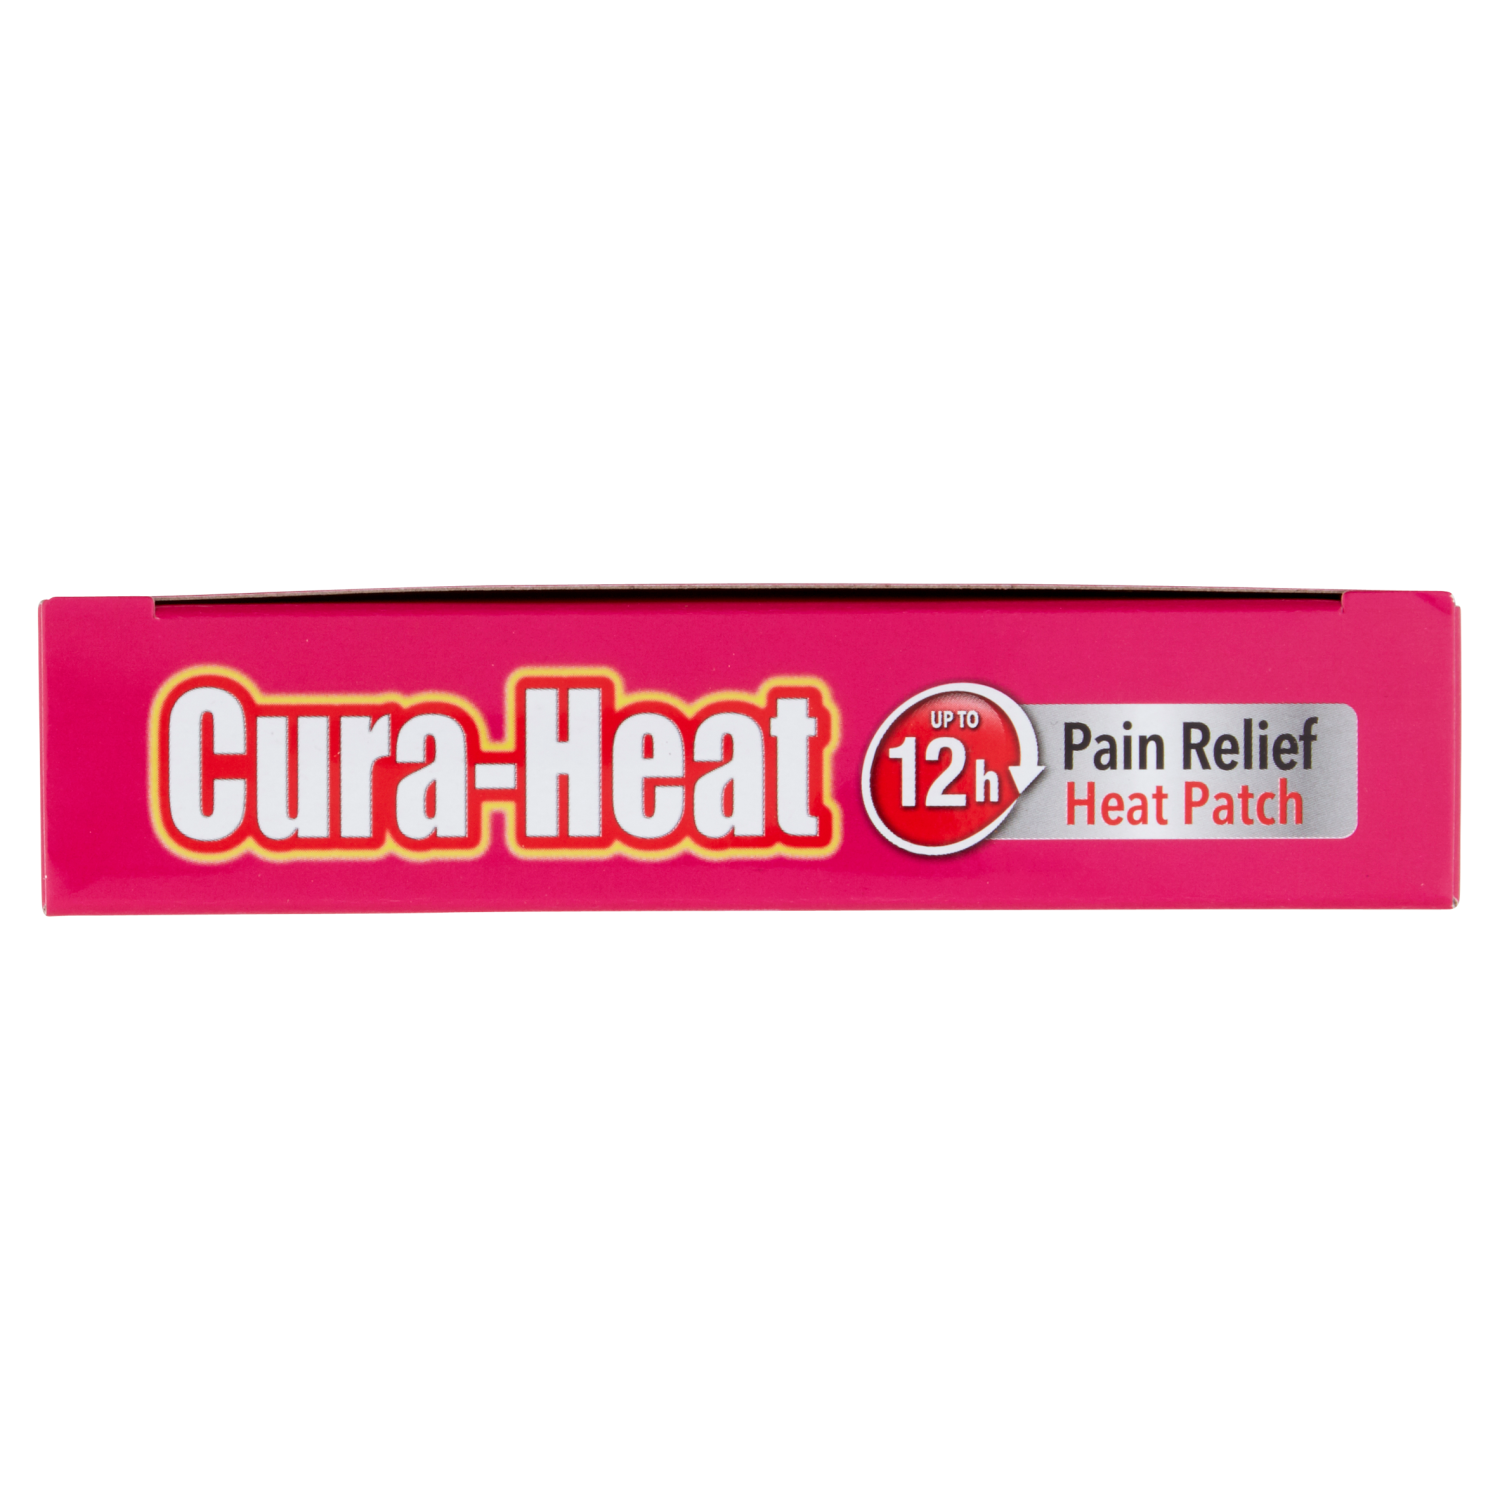 Cura-Heat Period Pain (3 Patches)